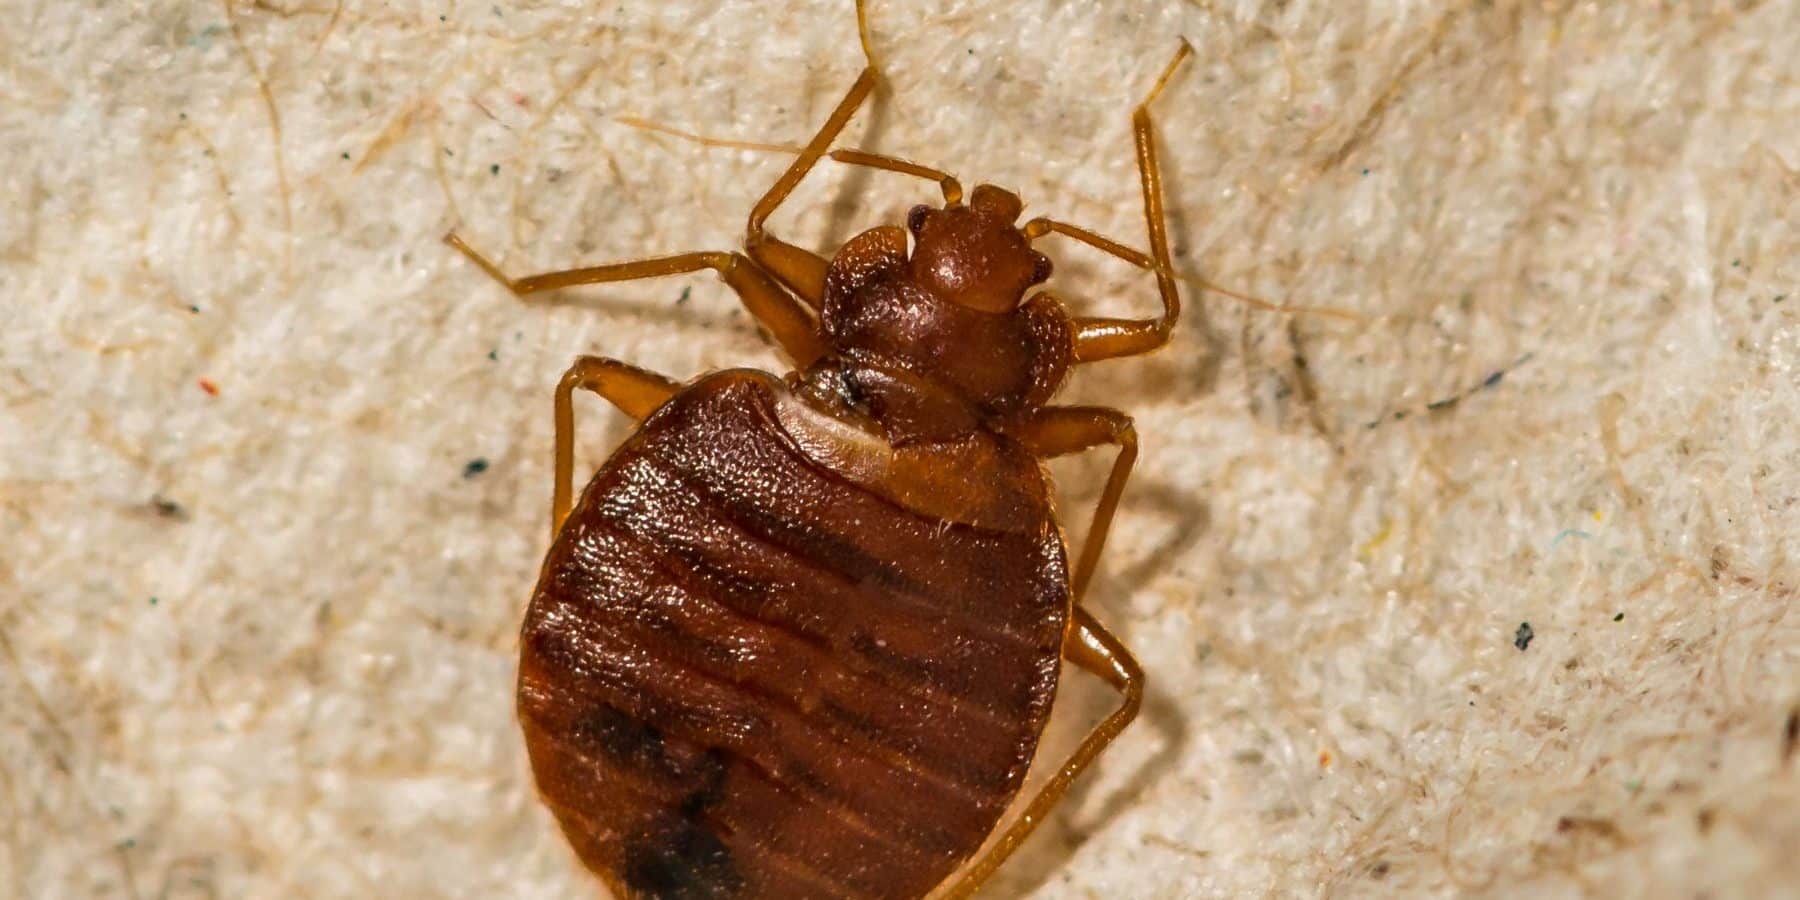 Bed Bug Treatments